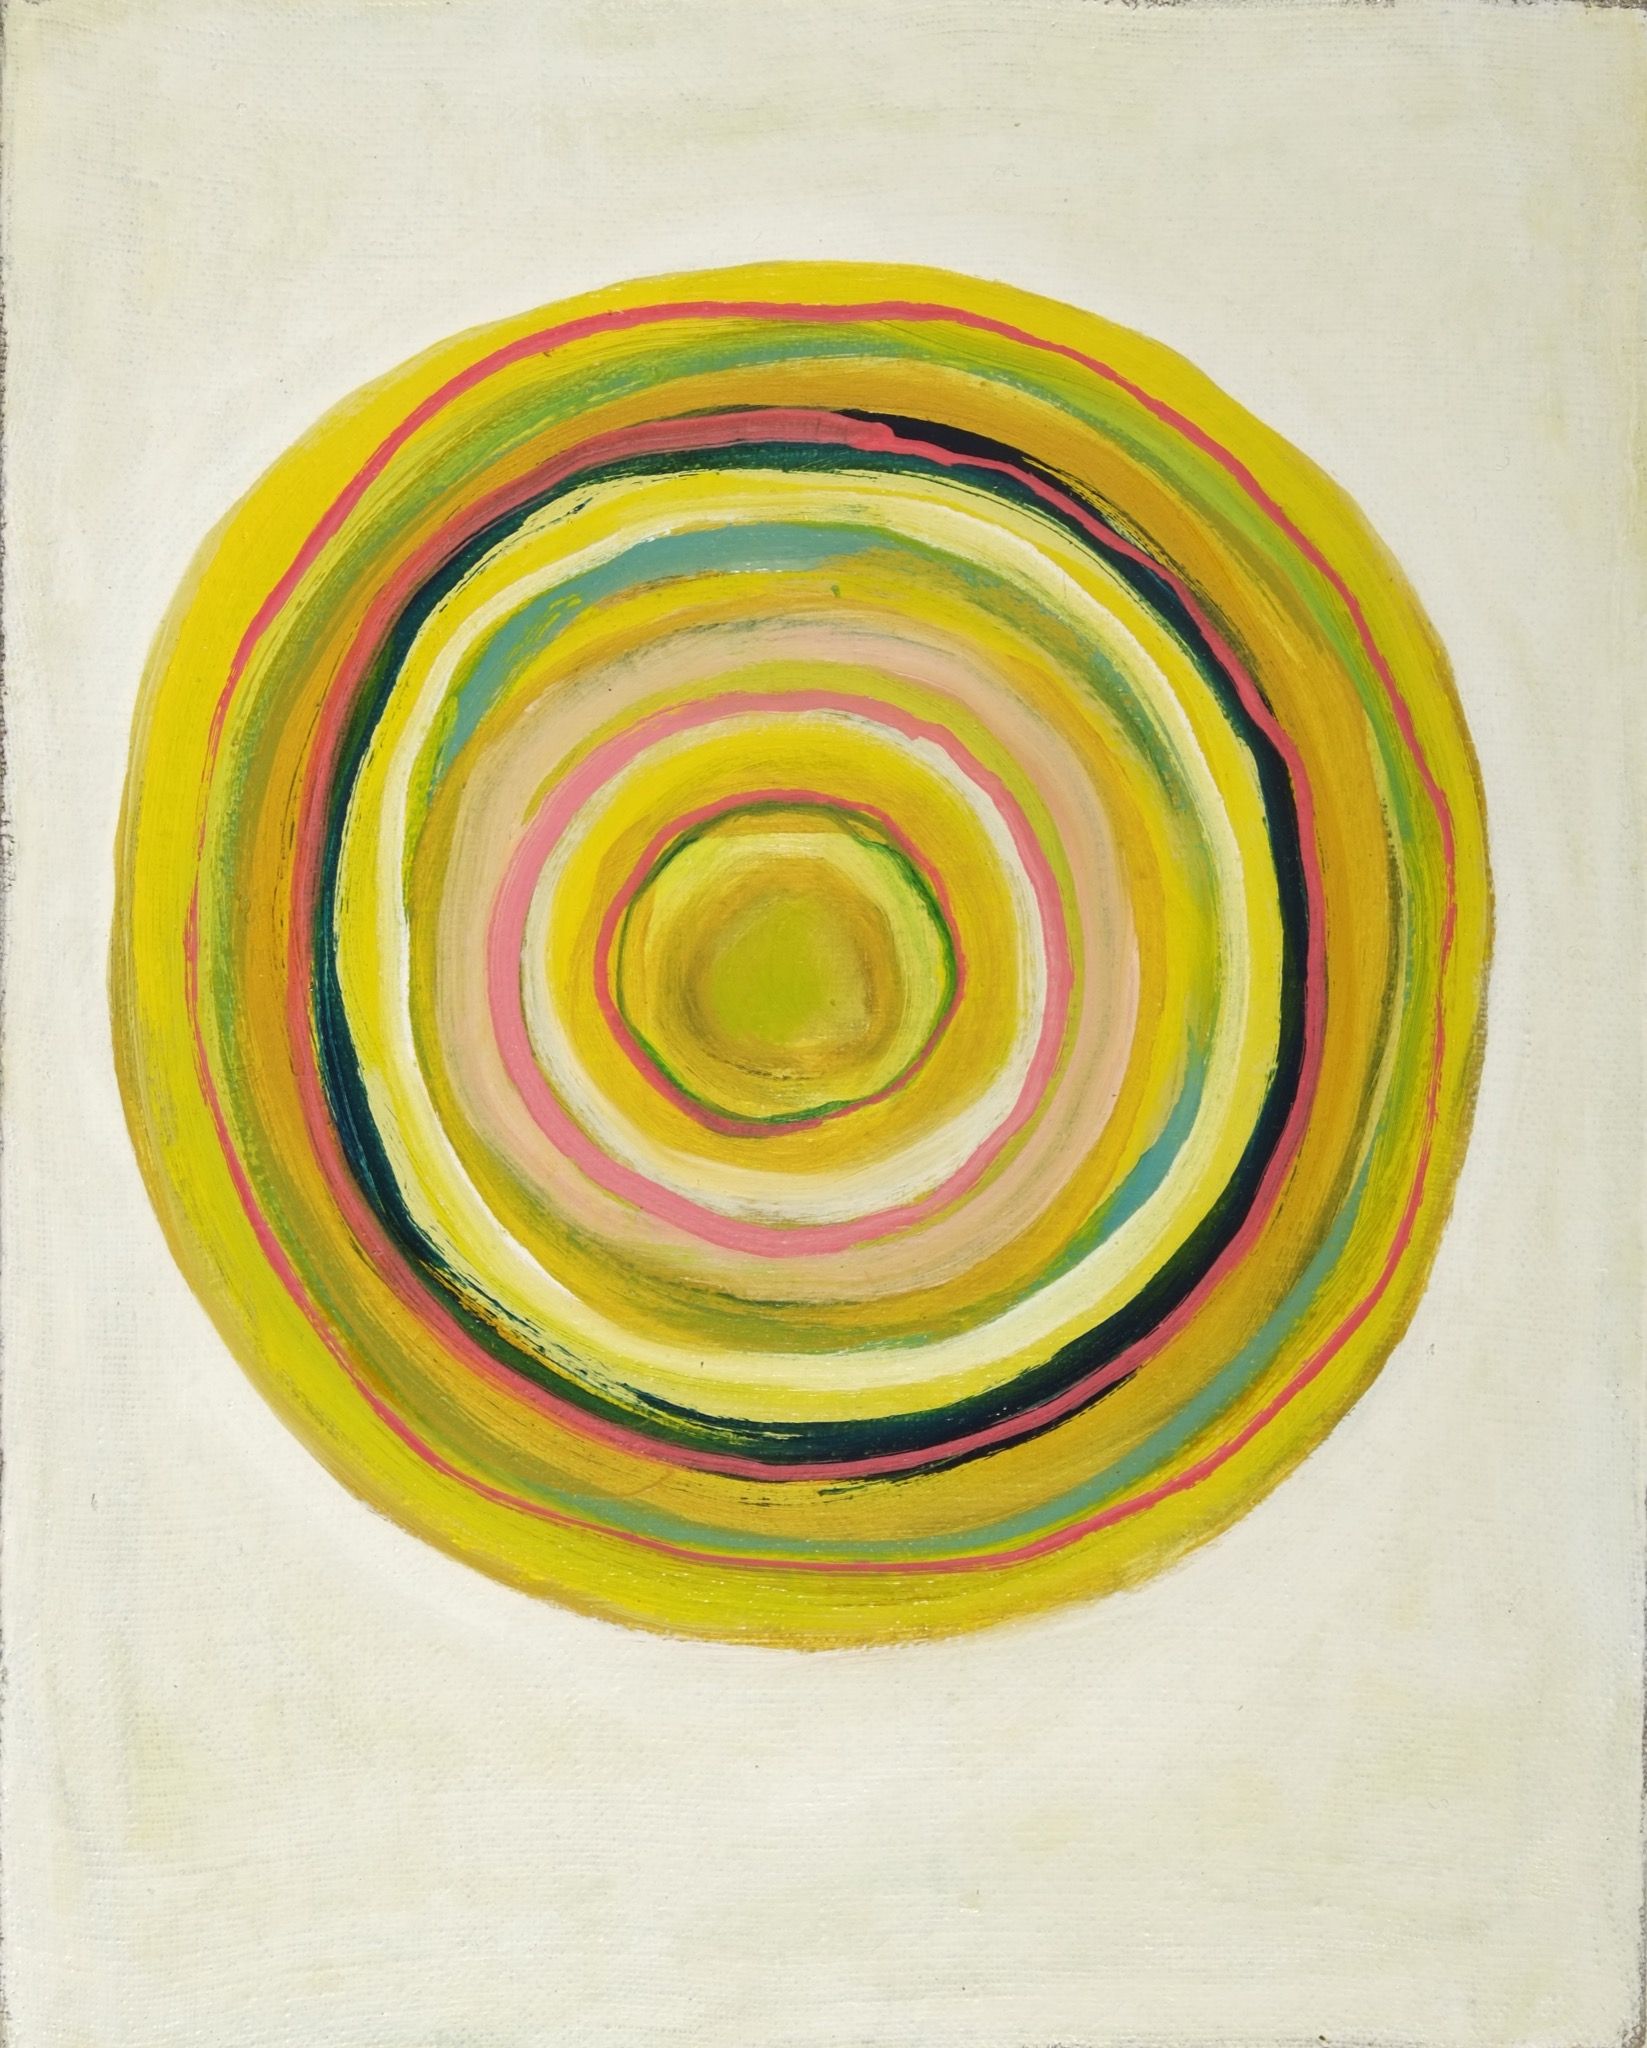 A painting of concentric yellow, green and pink circles on a white background.